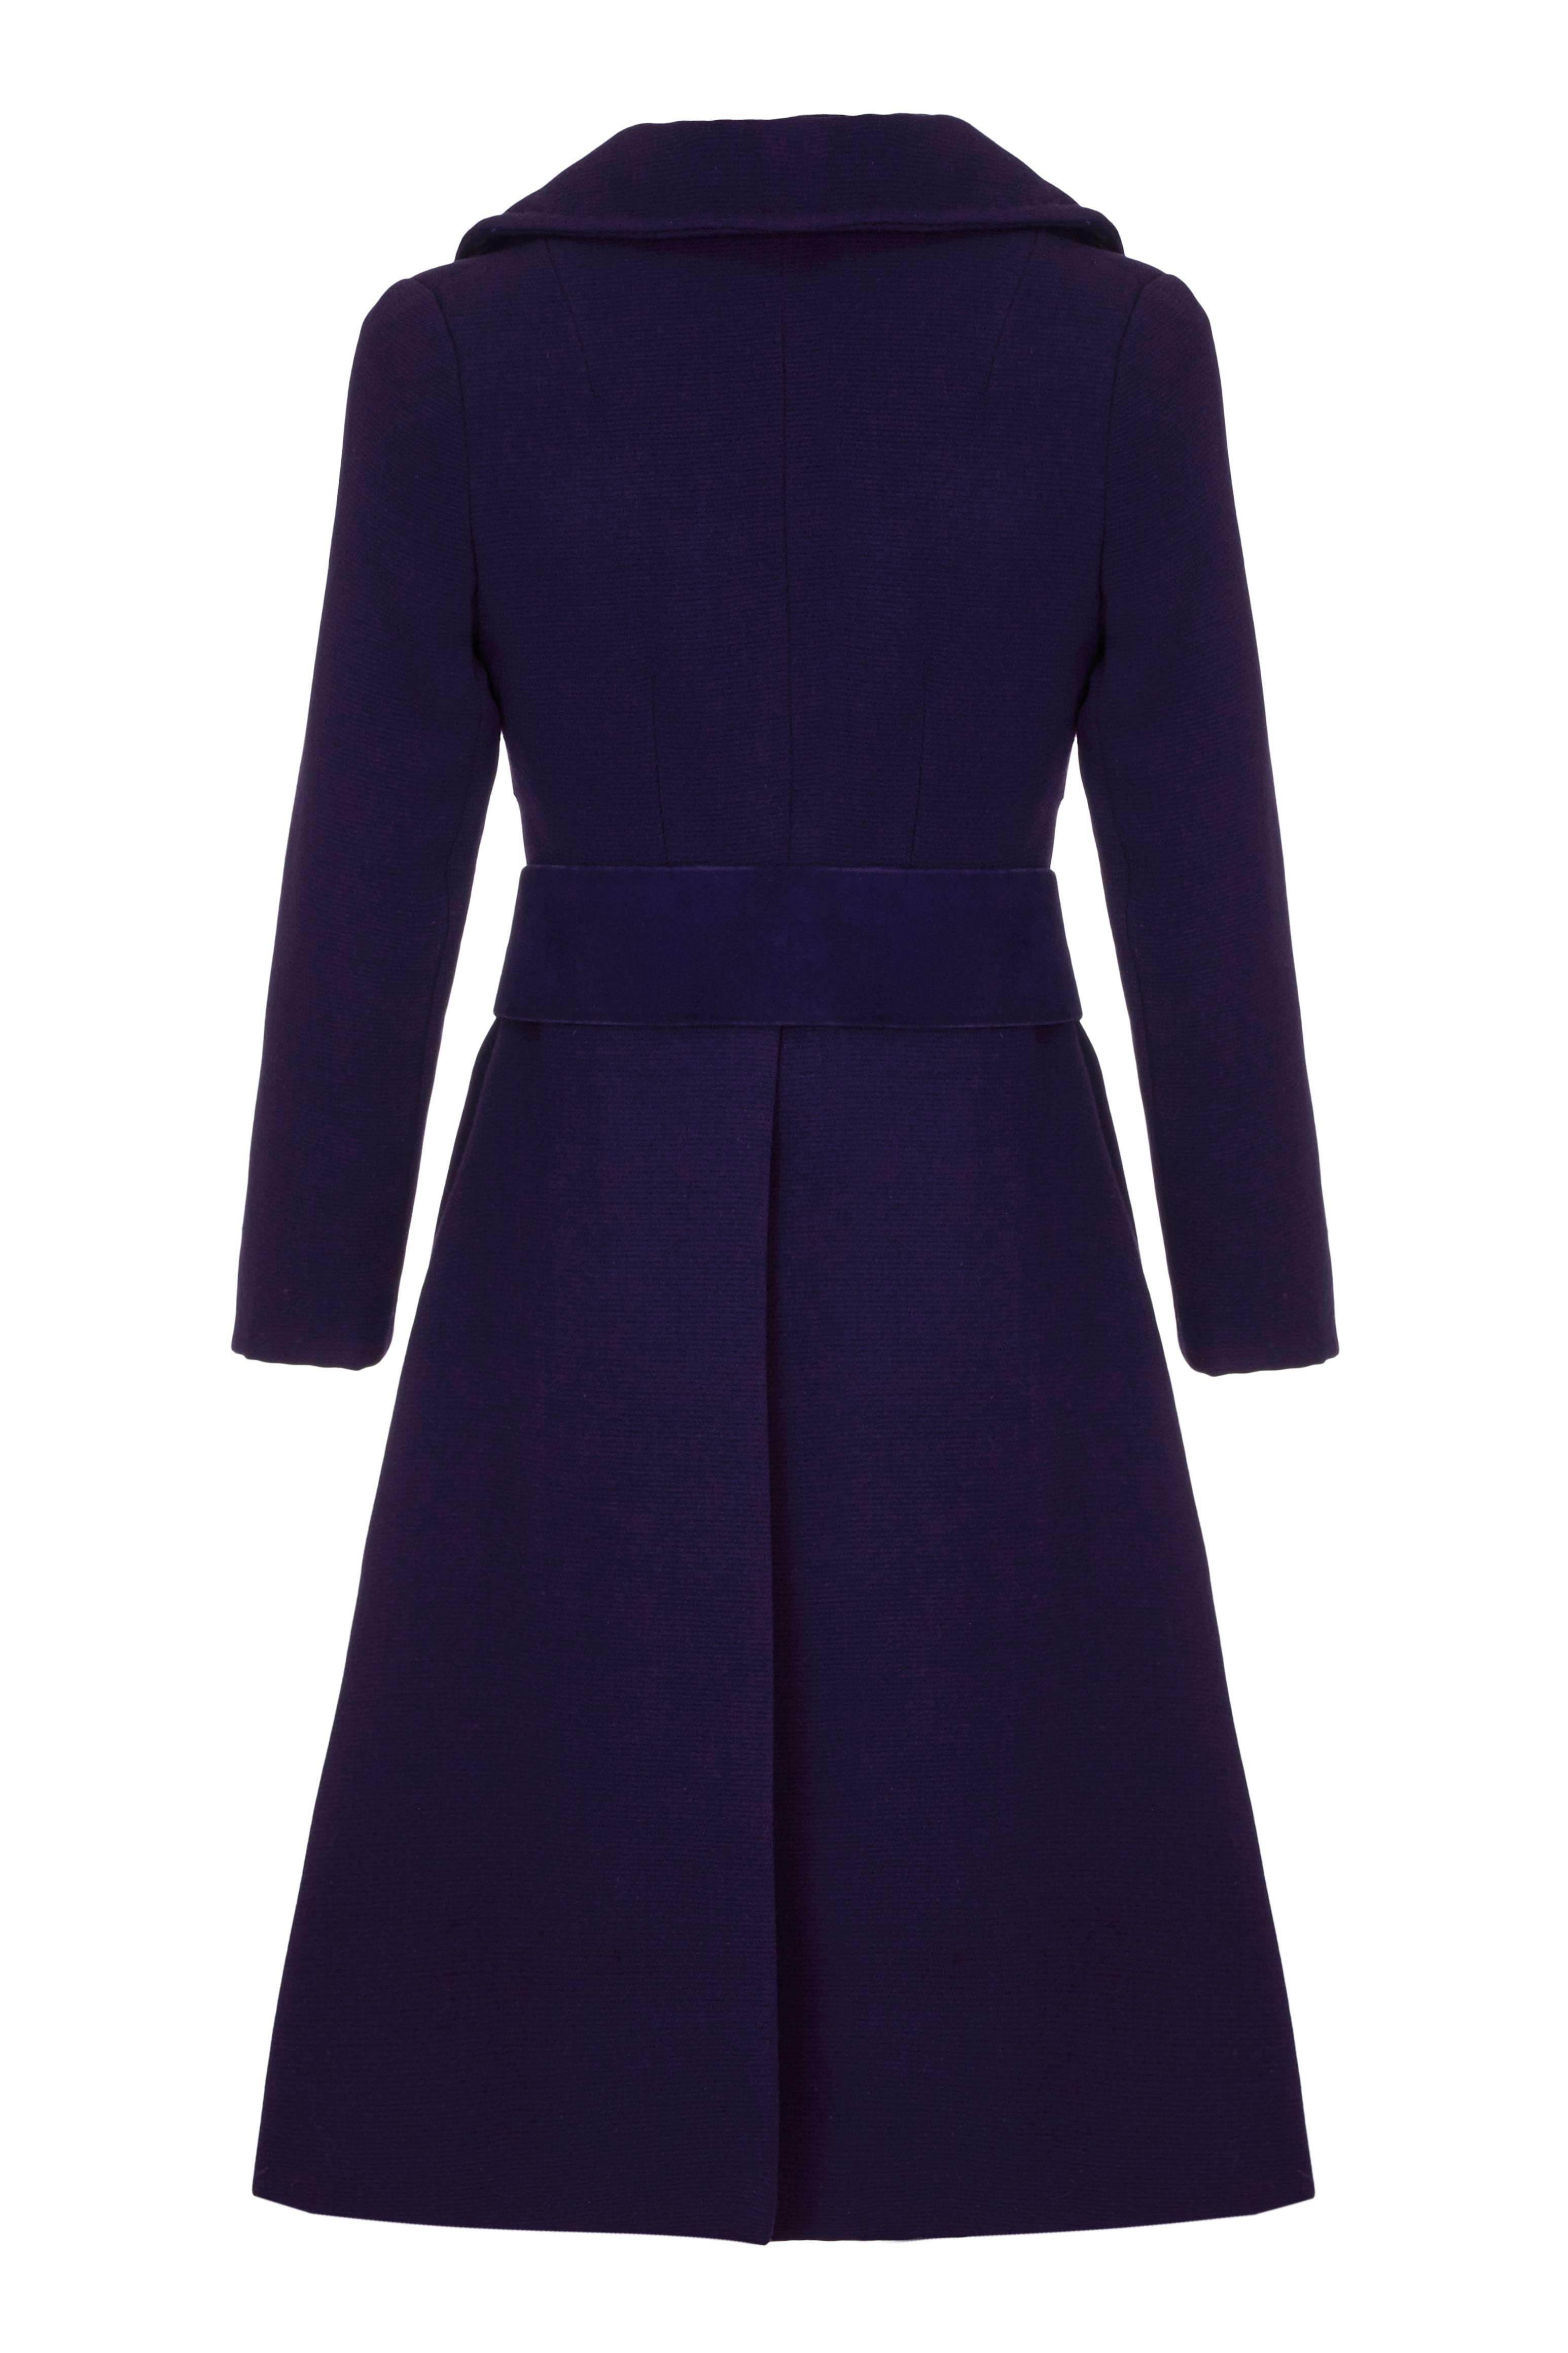 Gorgeous vintage mid to late 1960s haute couture purple wool coat, which is most likely to be a Pierre Cardin or Andre Courreges although unfortunately there is no label.  It comes with original matching hand made wide suede belt with large silver